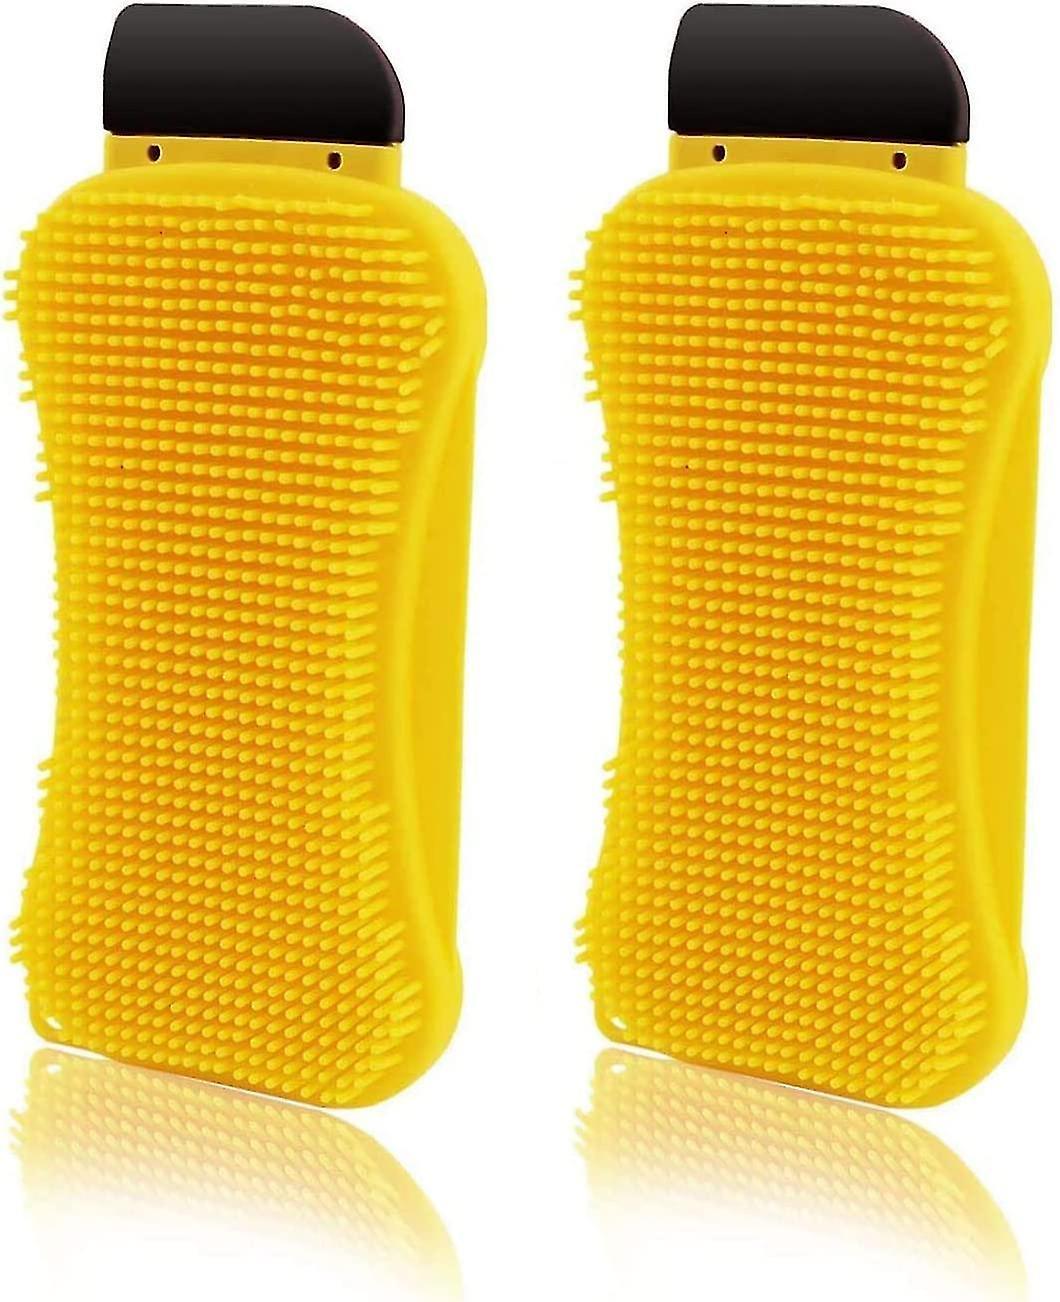 2 Pieces Of Silicone Sponge Multi-purpose 3 In 1 Household Tableware Cleaning Brush